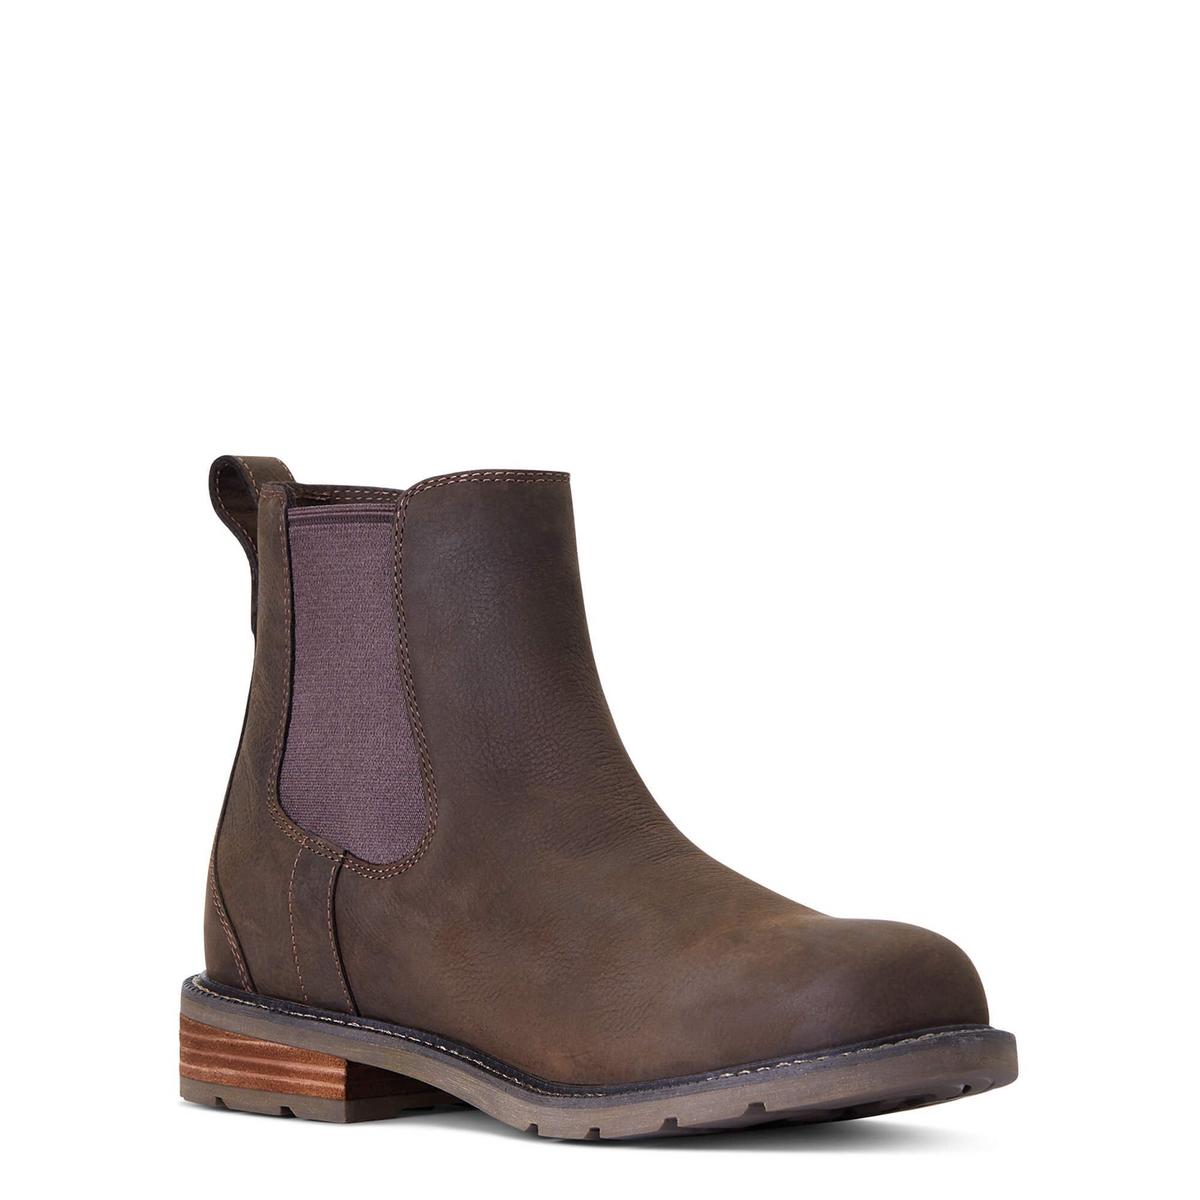 Ariat Men's Wexford H2O Chelsea Boots - Brown